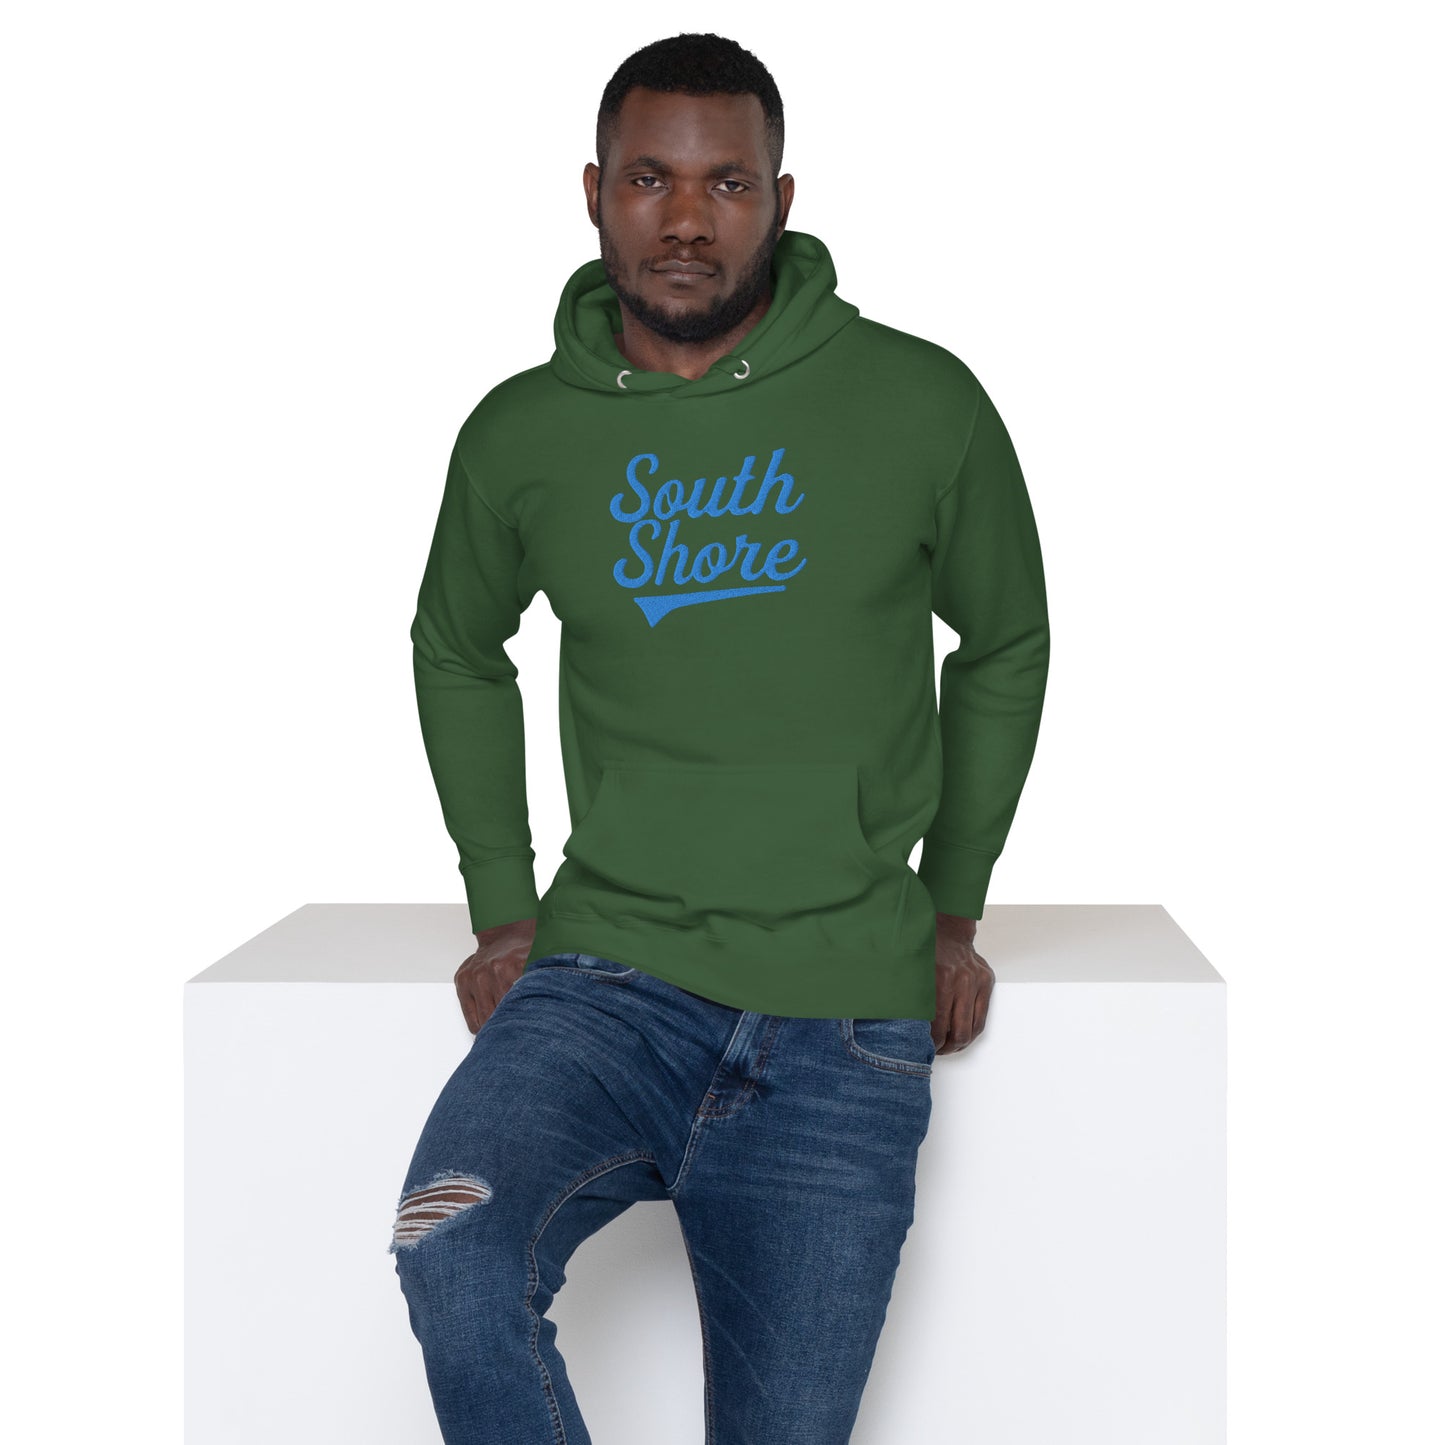 Embroidered South Shore Hoodie | South Shore Tars